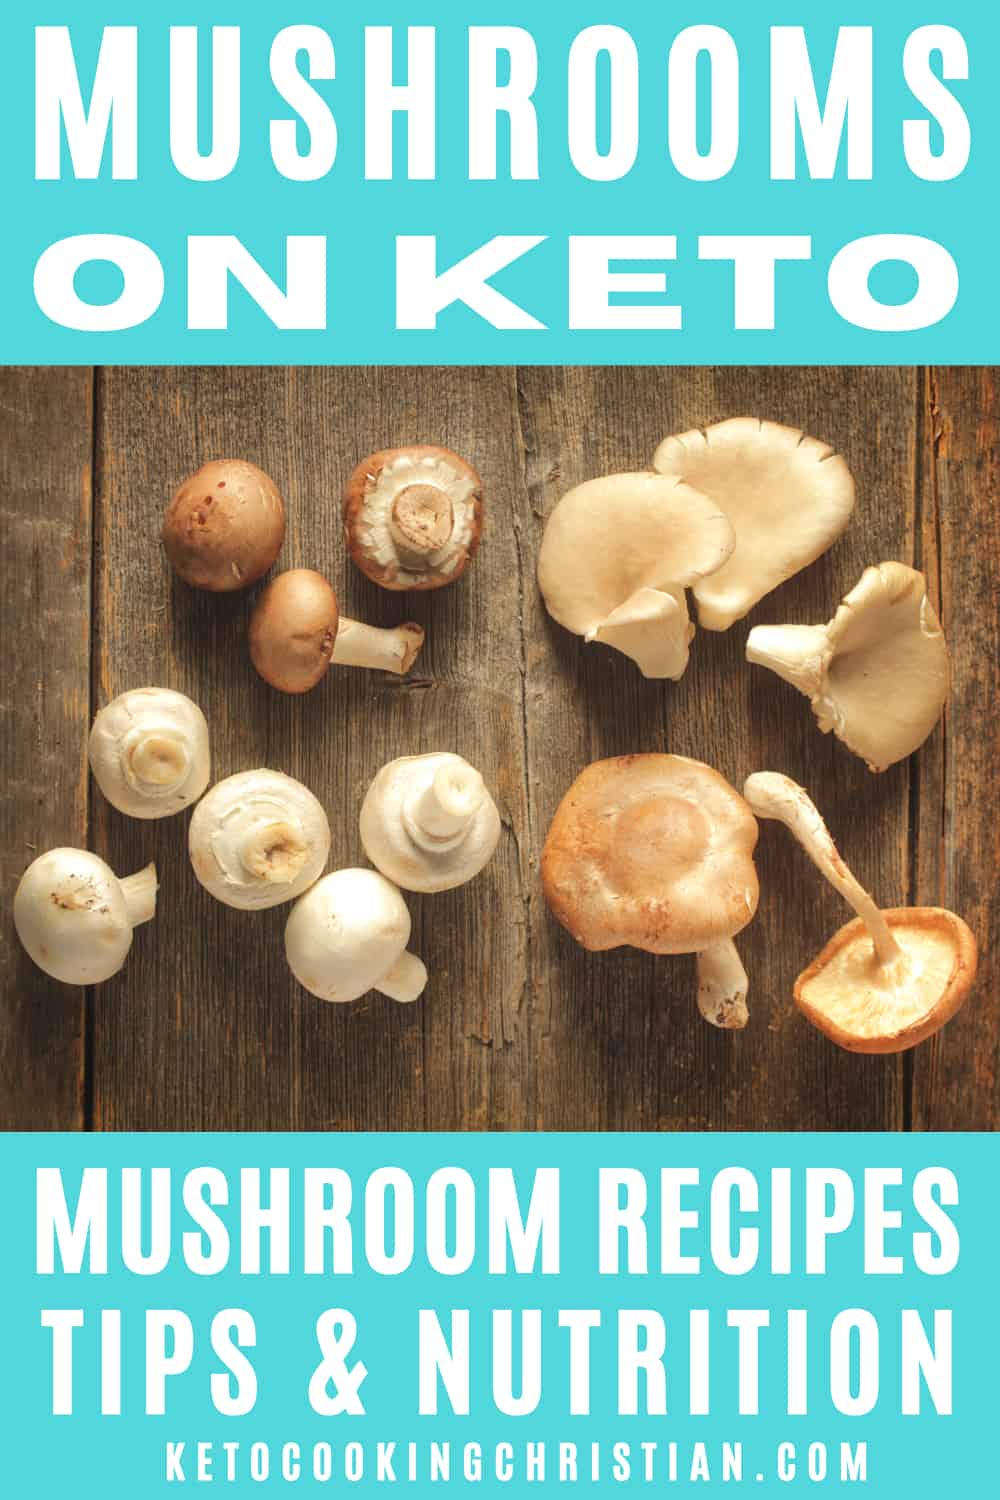 In conclusion, mushrooms are keto-friendly and can be enjoyed as part of a keto diet. They are low in carbs, low in calories, and packed with nutrients. So go ahead and add mushrooms to your next keto-friendly recipe!